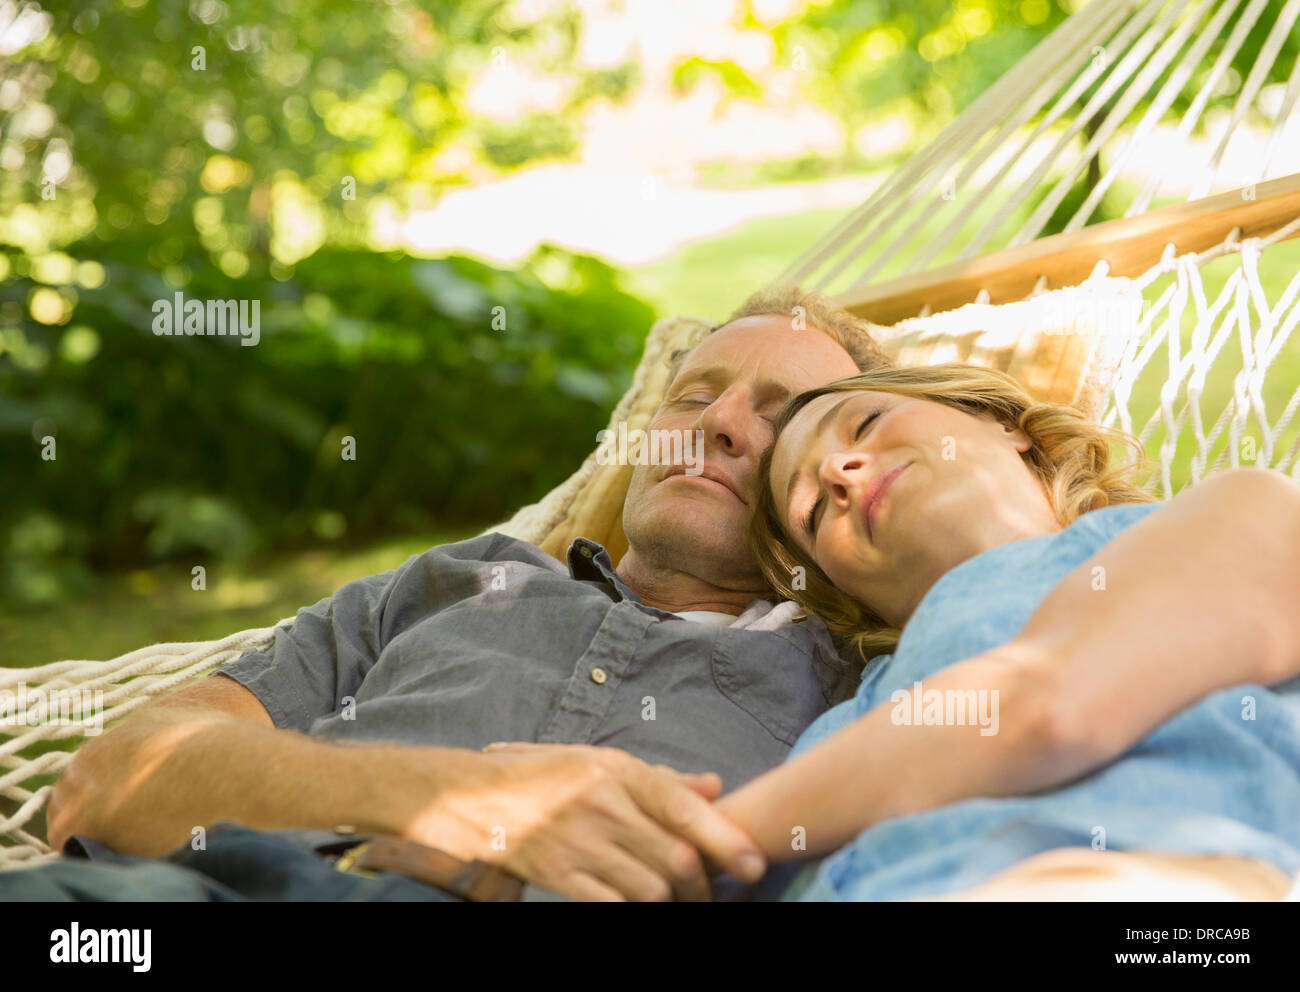 Couple sleeping in hammock Banque D'Images